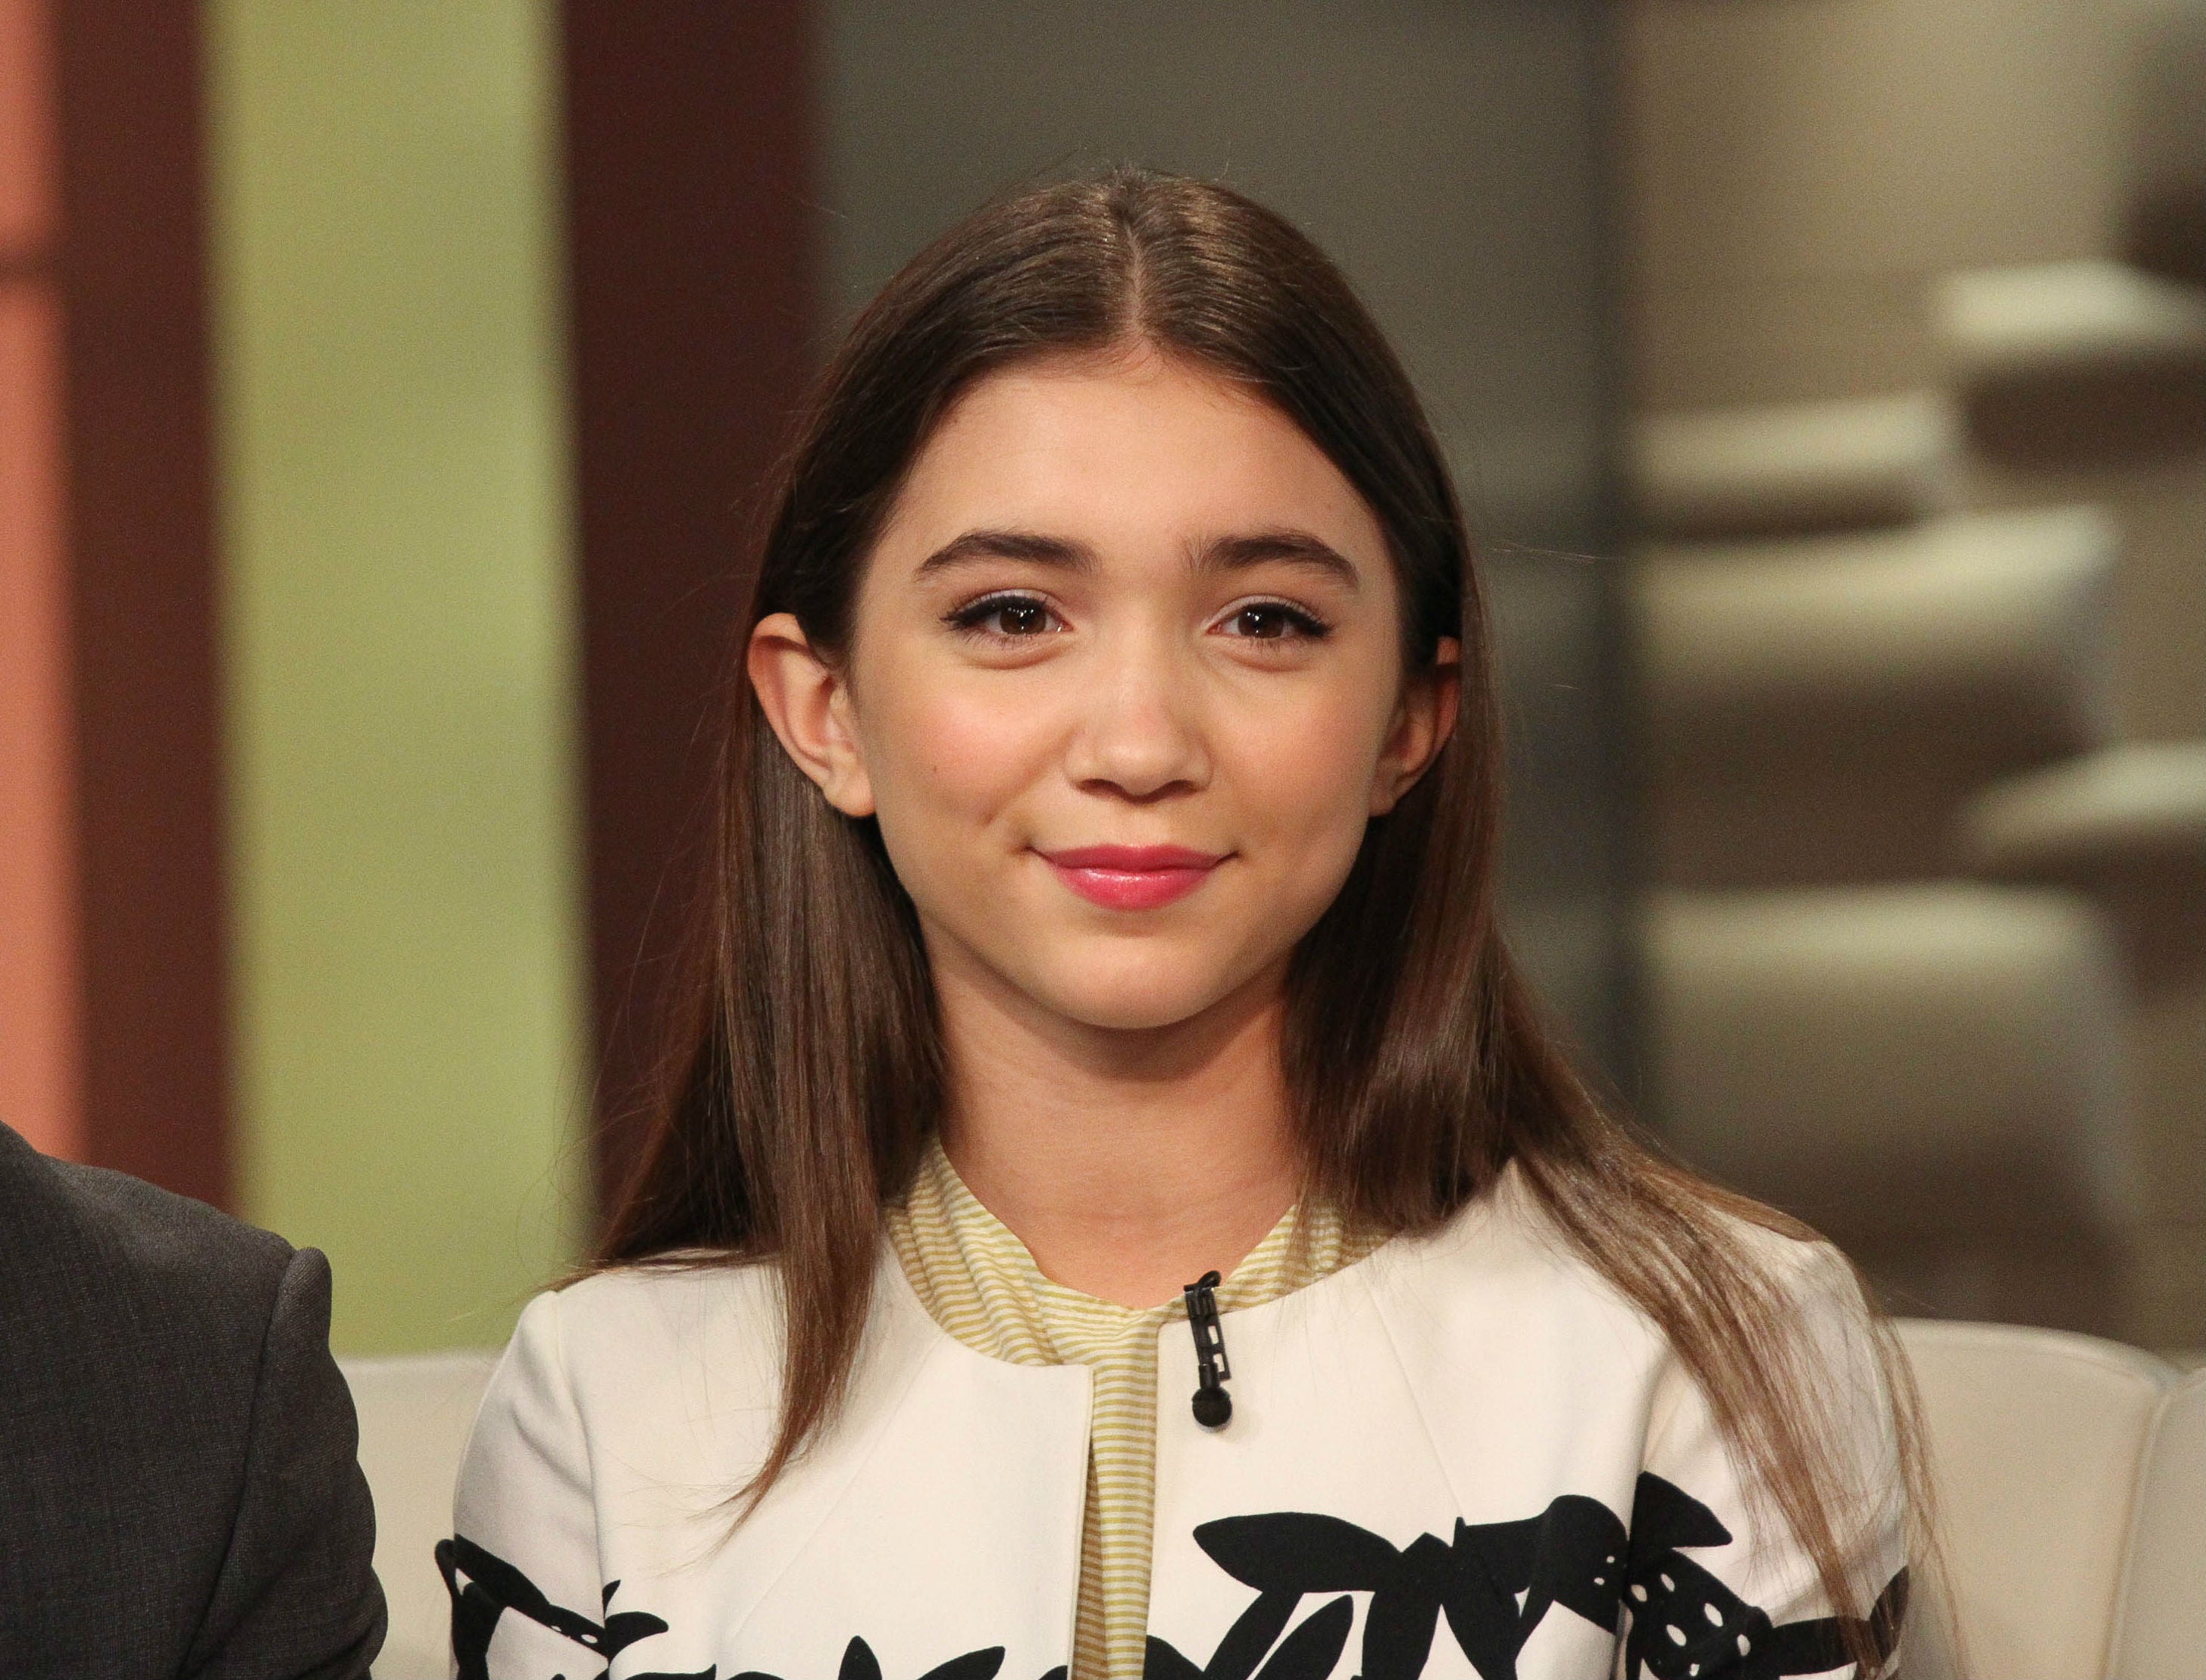 Rowan Blanchard 13 Year Old Disney Star Sparks Debate About White Feminism With Engaging